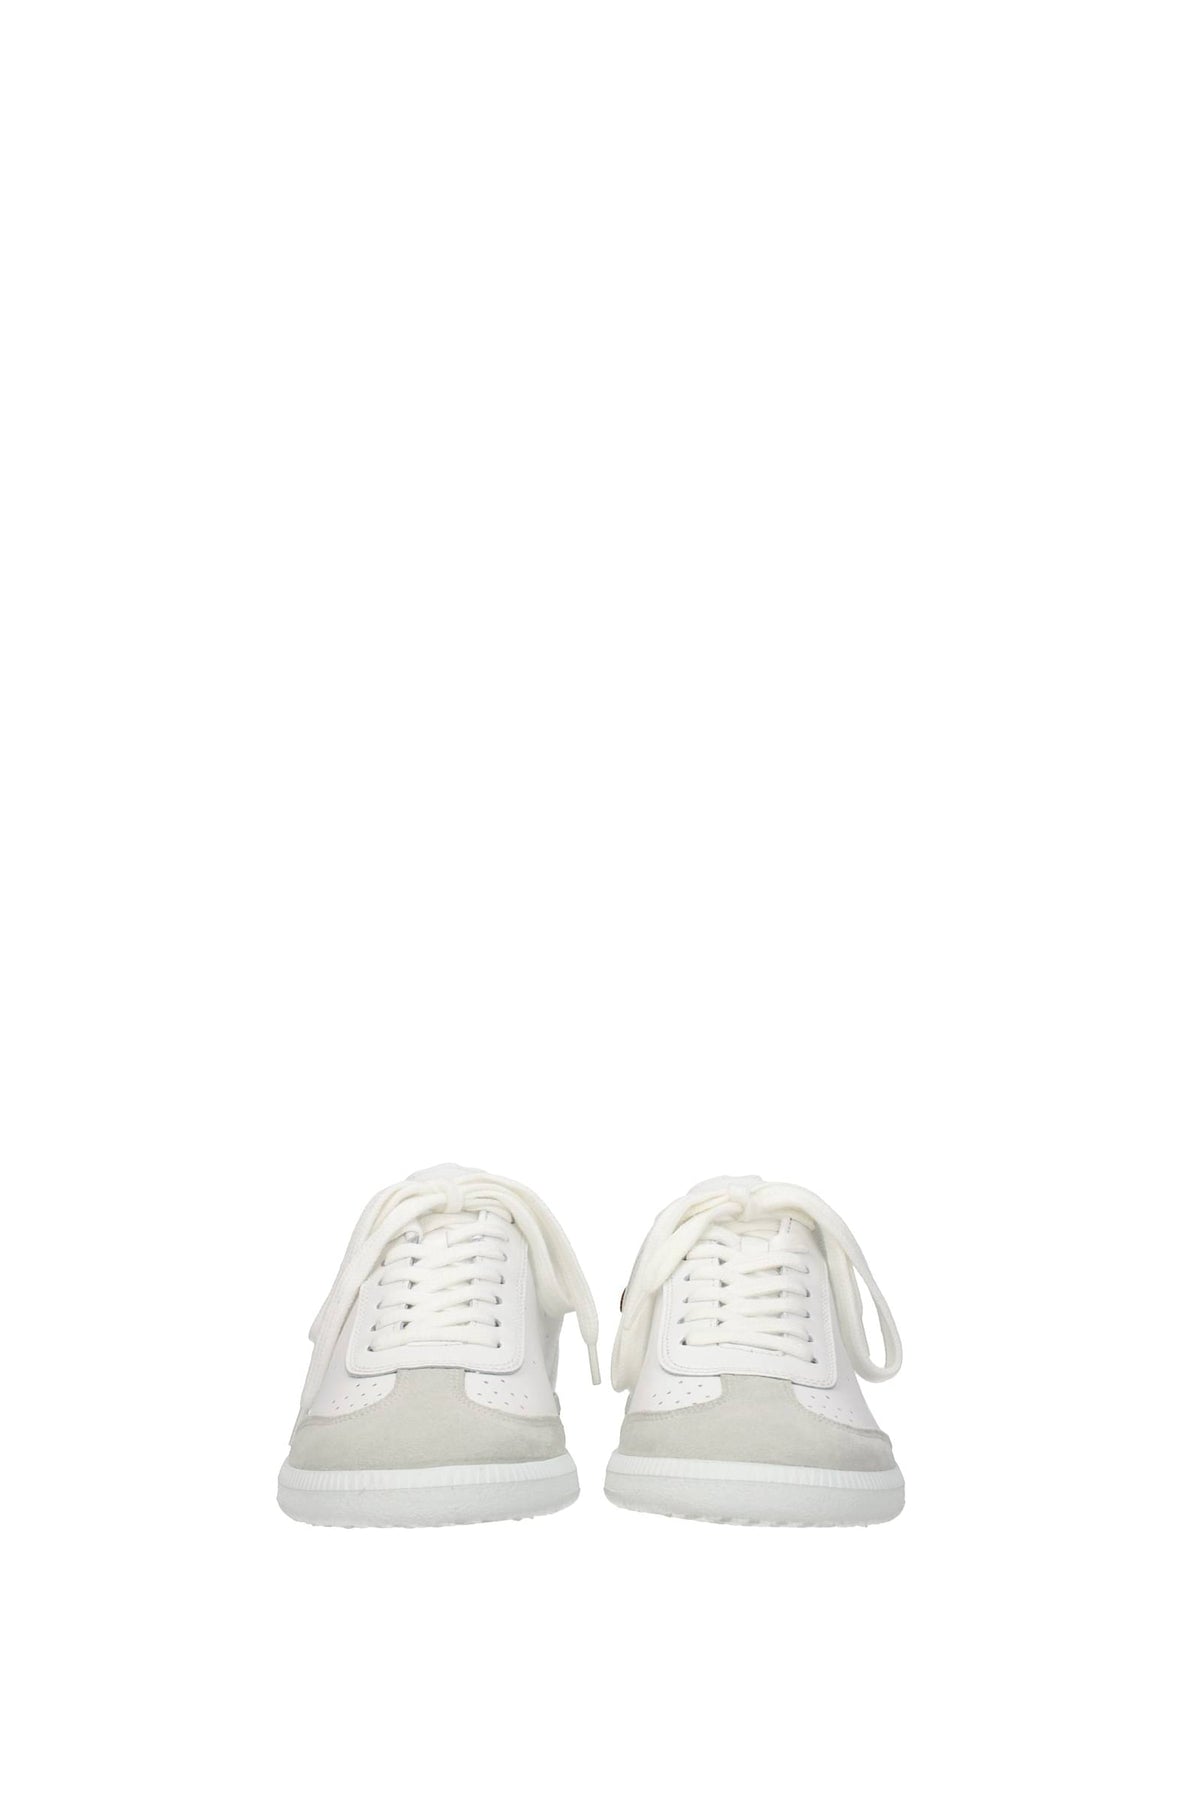 Shop Isabel Marant Sneakers Leather White Brown